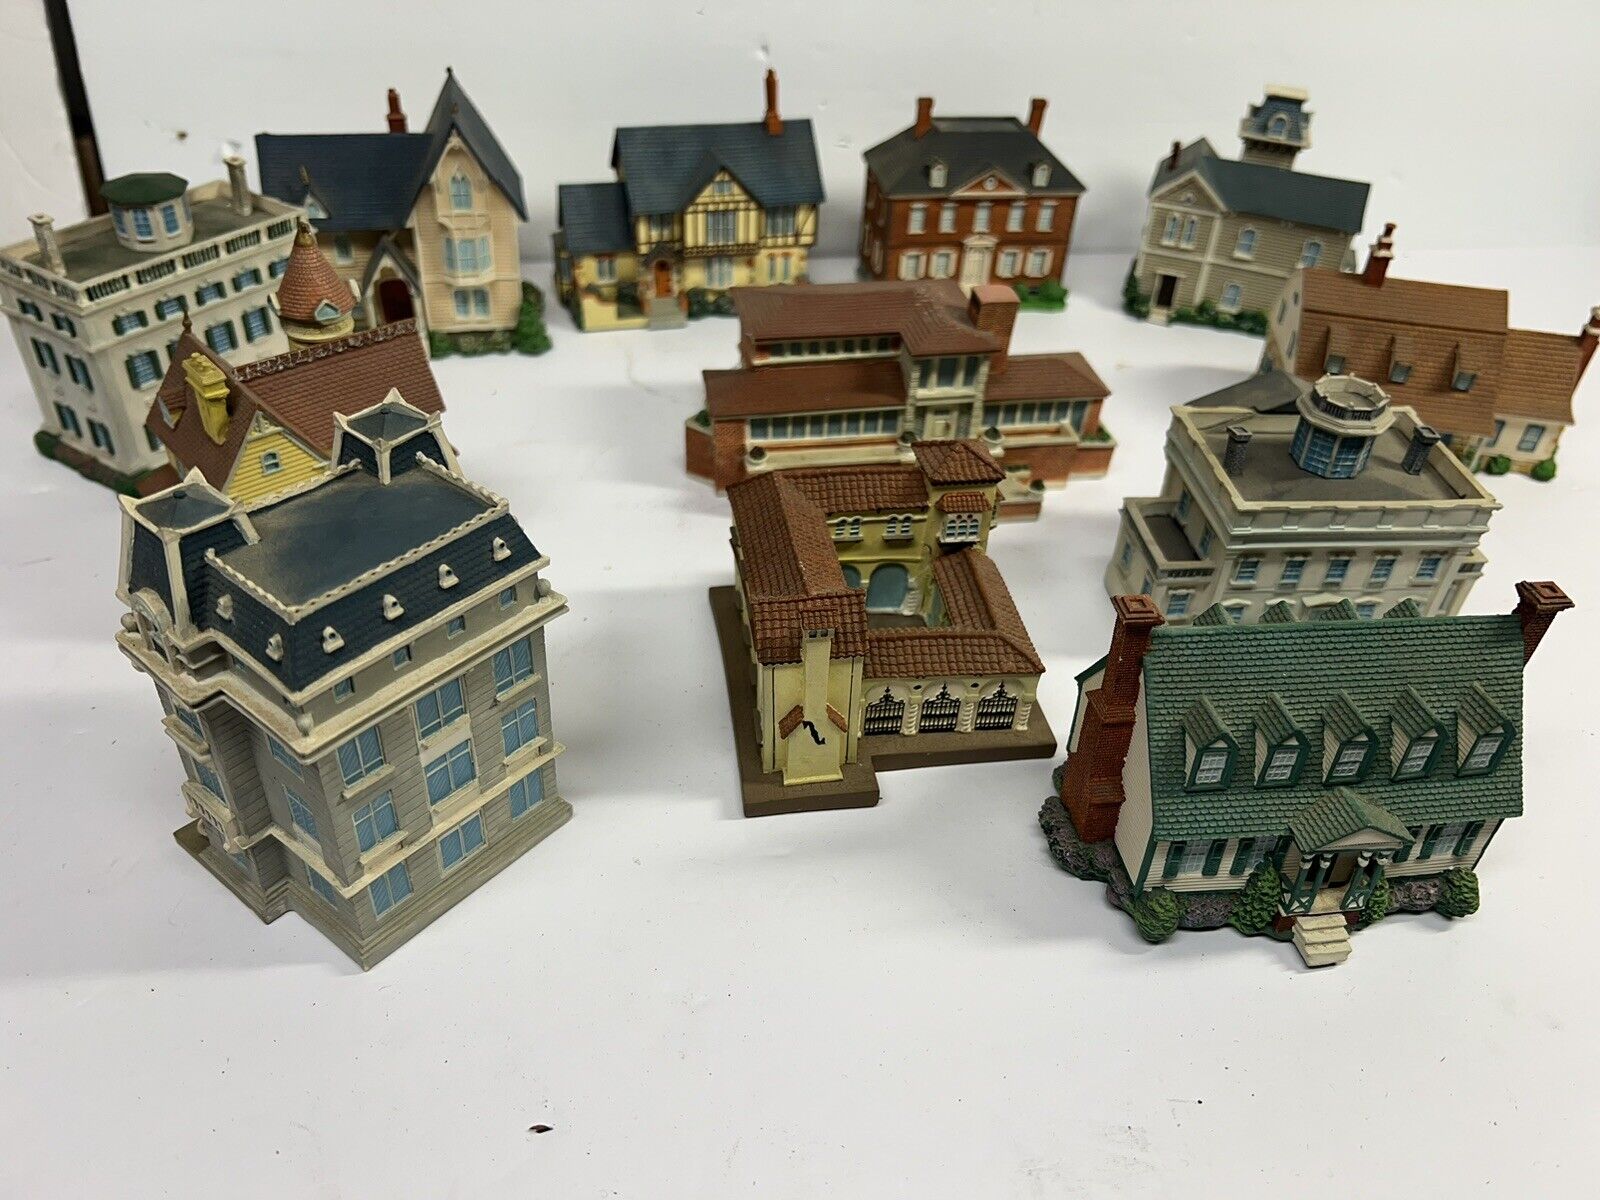 1988 The Franklin Mint Figurine Display Model American Homes Houses - of 12